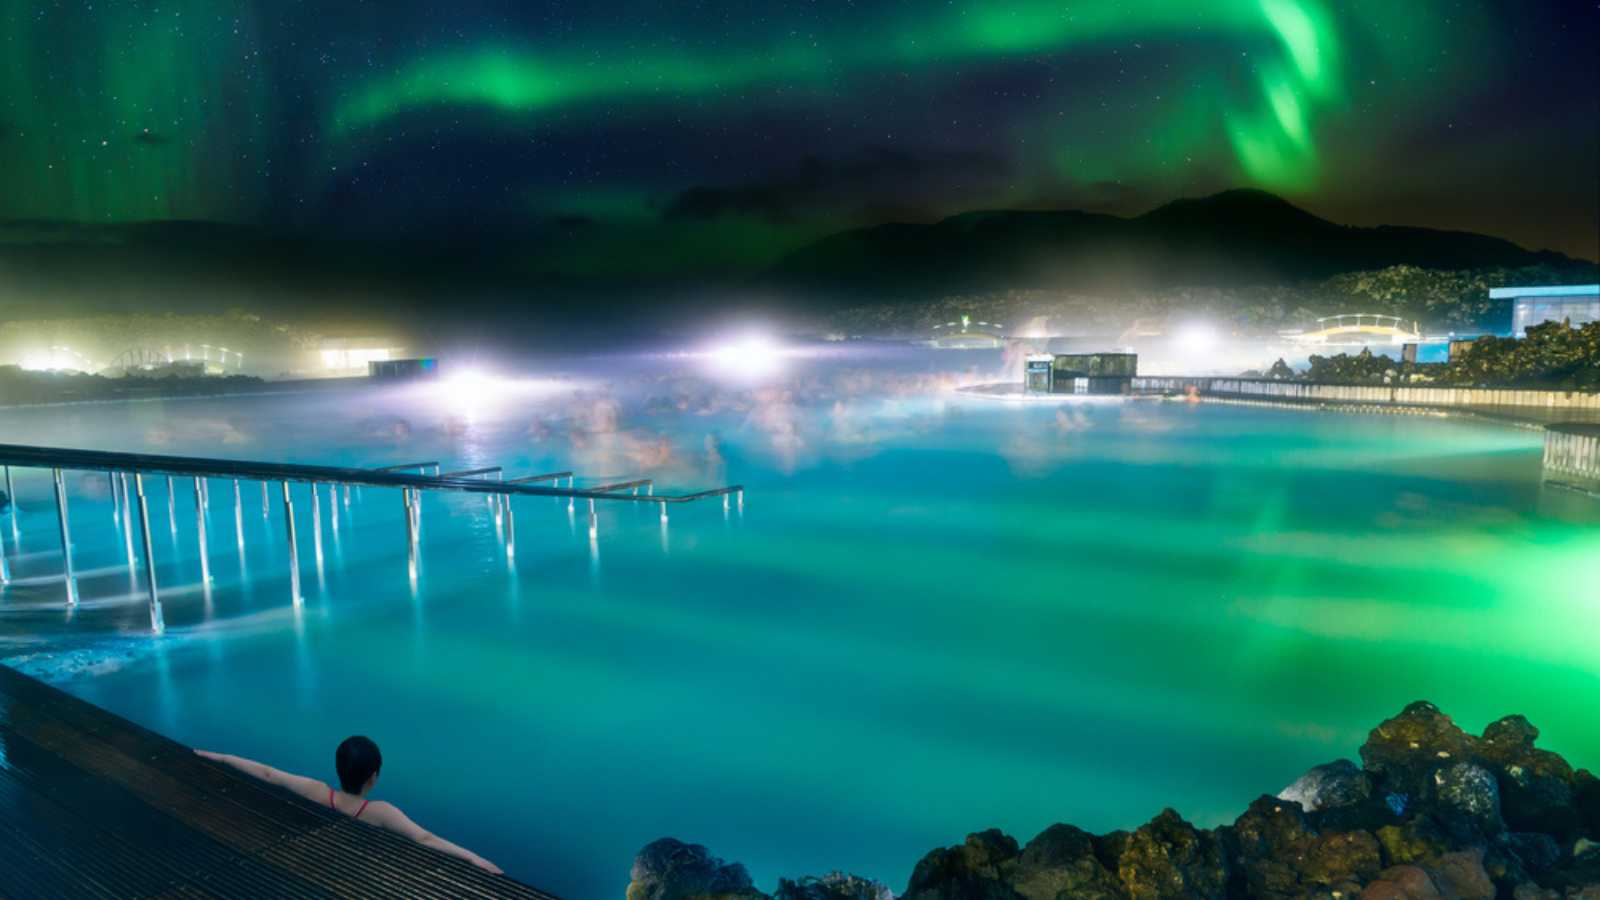 <p>Is a trip to see the aurora borealis on your wishlist? If so, visit Iceland during the winter when you are more likely to experience this feast of colors in the sky. September to March is the best time. If you want a five-star luxury stay, consider the Silica Hotel. Head to Iceland’s most visited otherworldly attraction and dip in the 102-degree lagoon.</p>